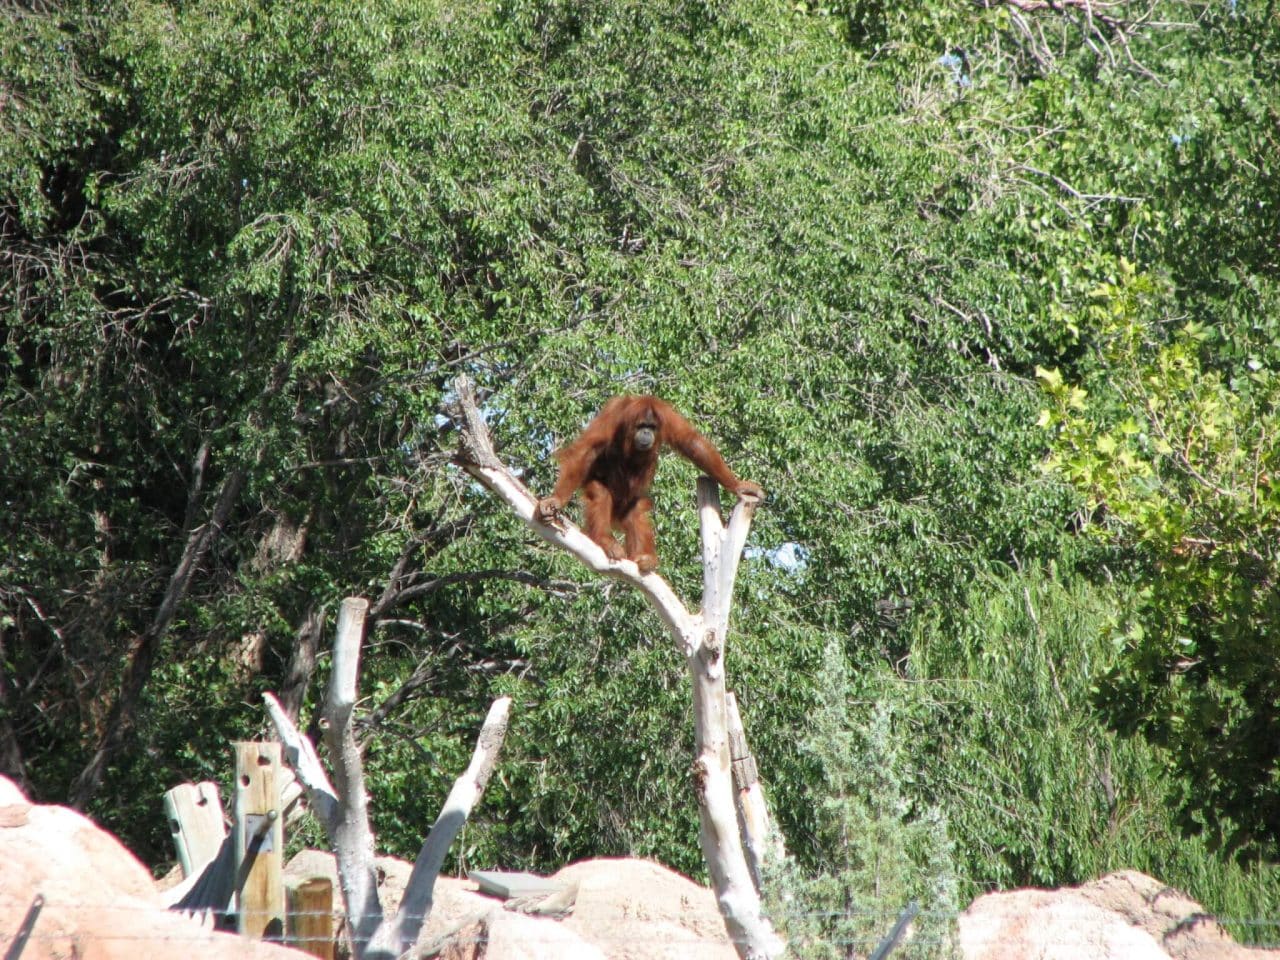 An orangutan high up in a tree watching the people enter the Albuquerque Zoo.